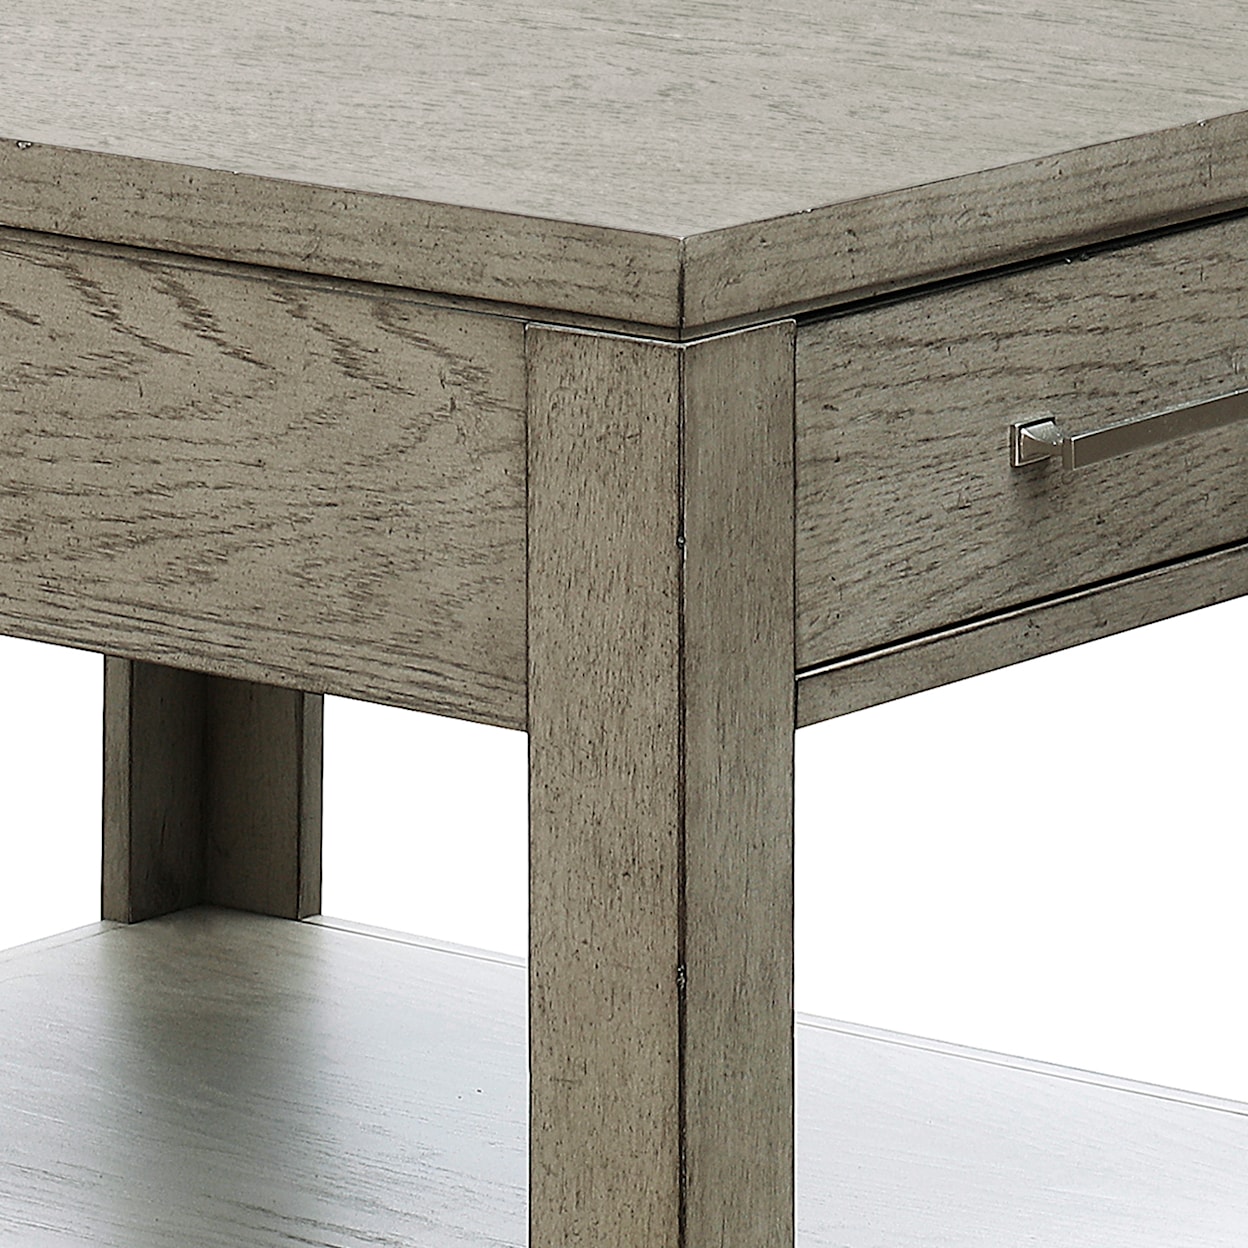 Samuel Lawrence Essex by Drew and Jonathan Home Essex End Table